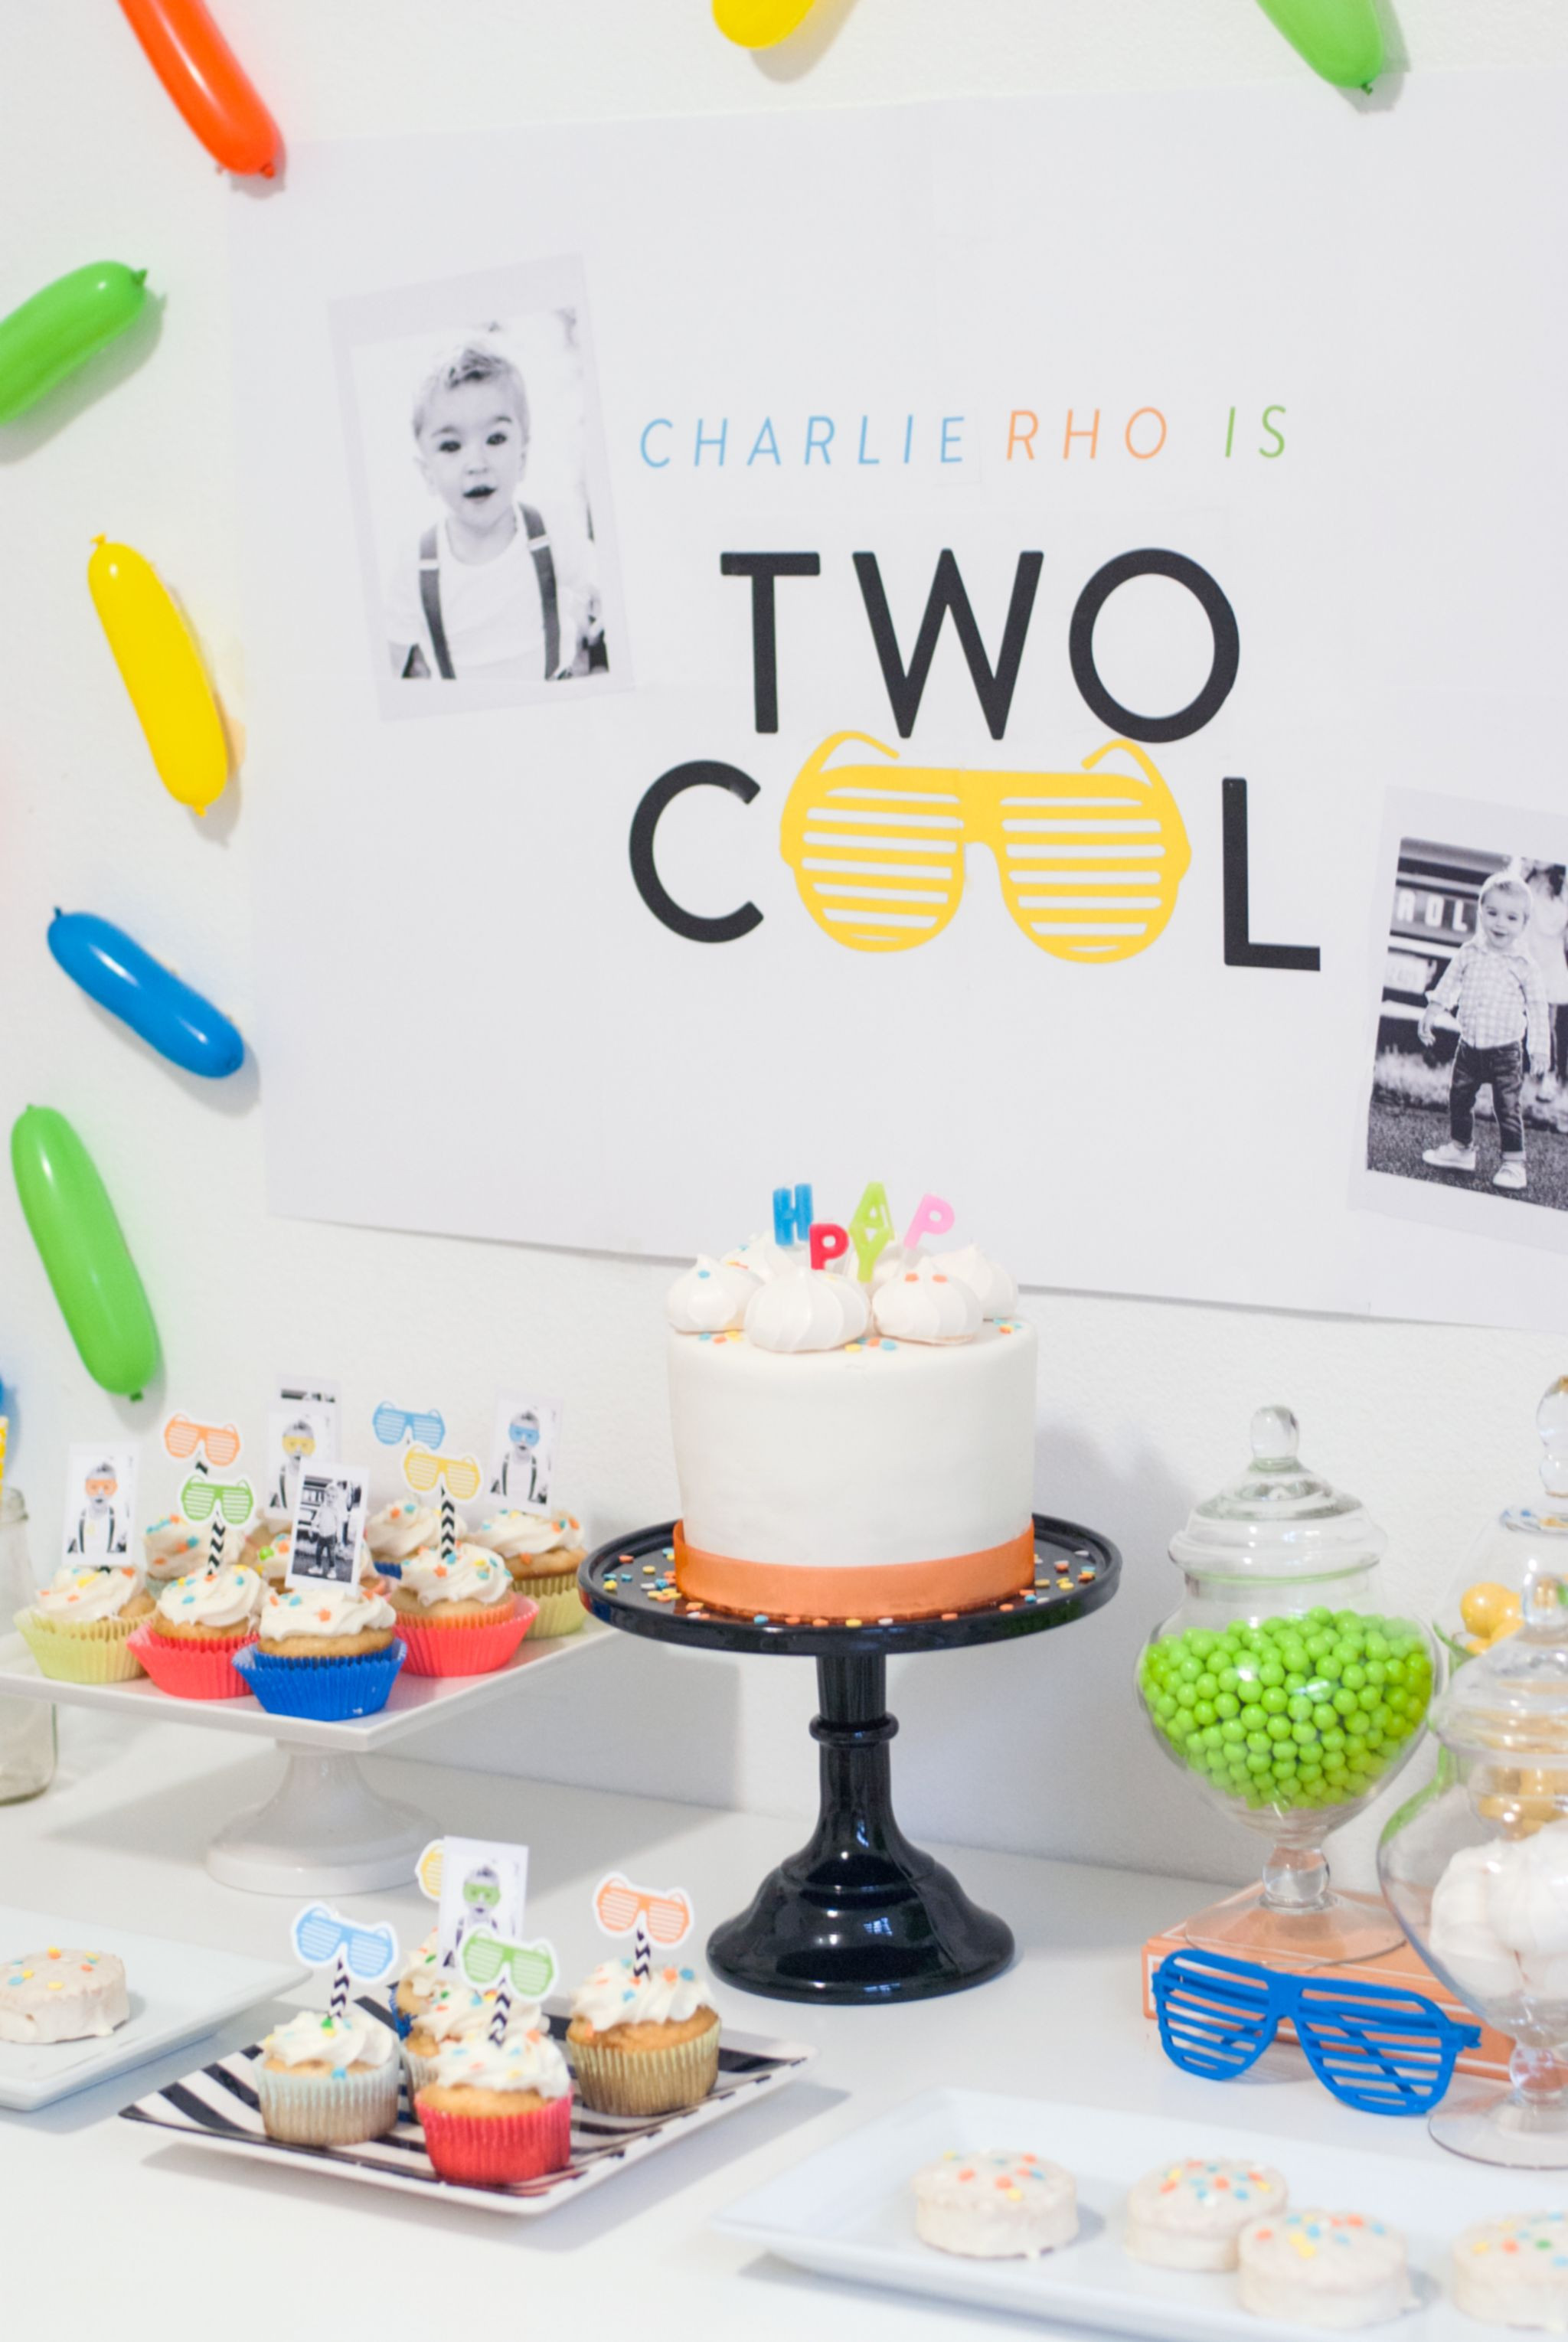 2Nd Birthday Gift Ideas For Boys
 A Two Cool Birthday Party That ll Have You Reaching for